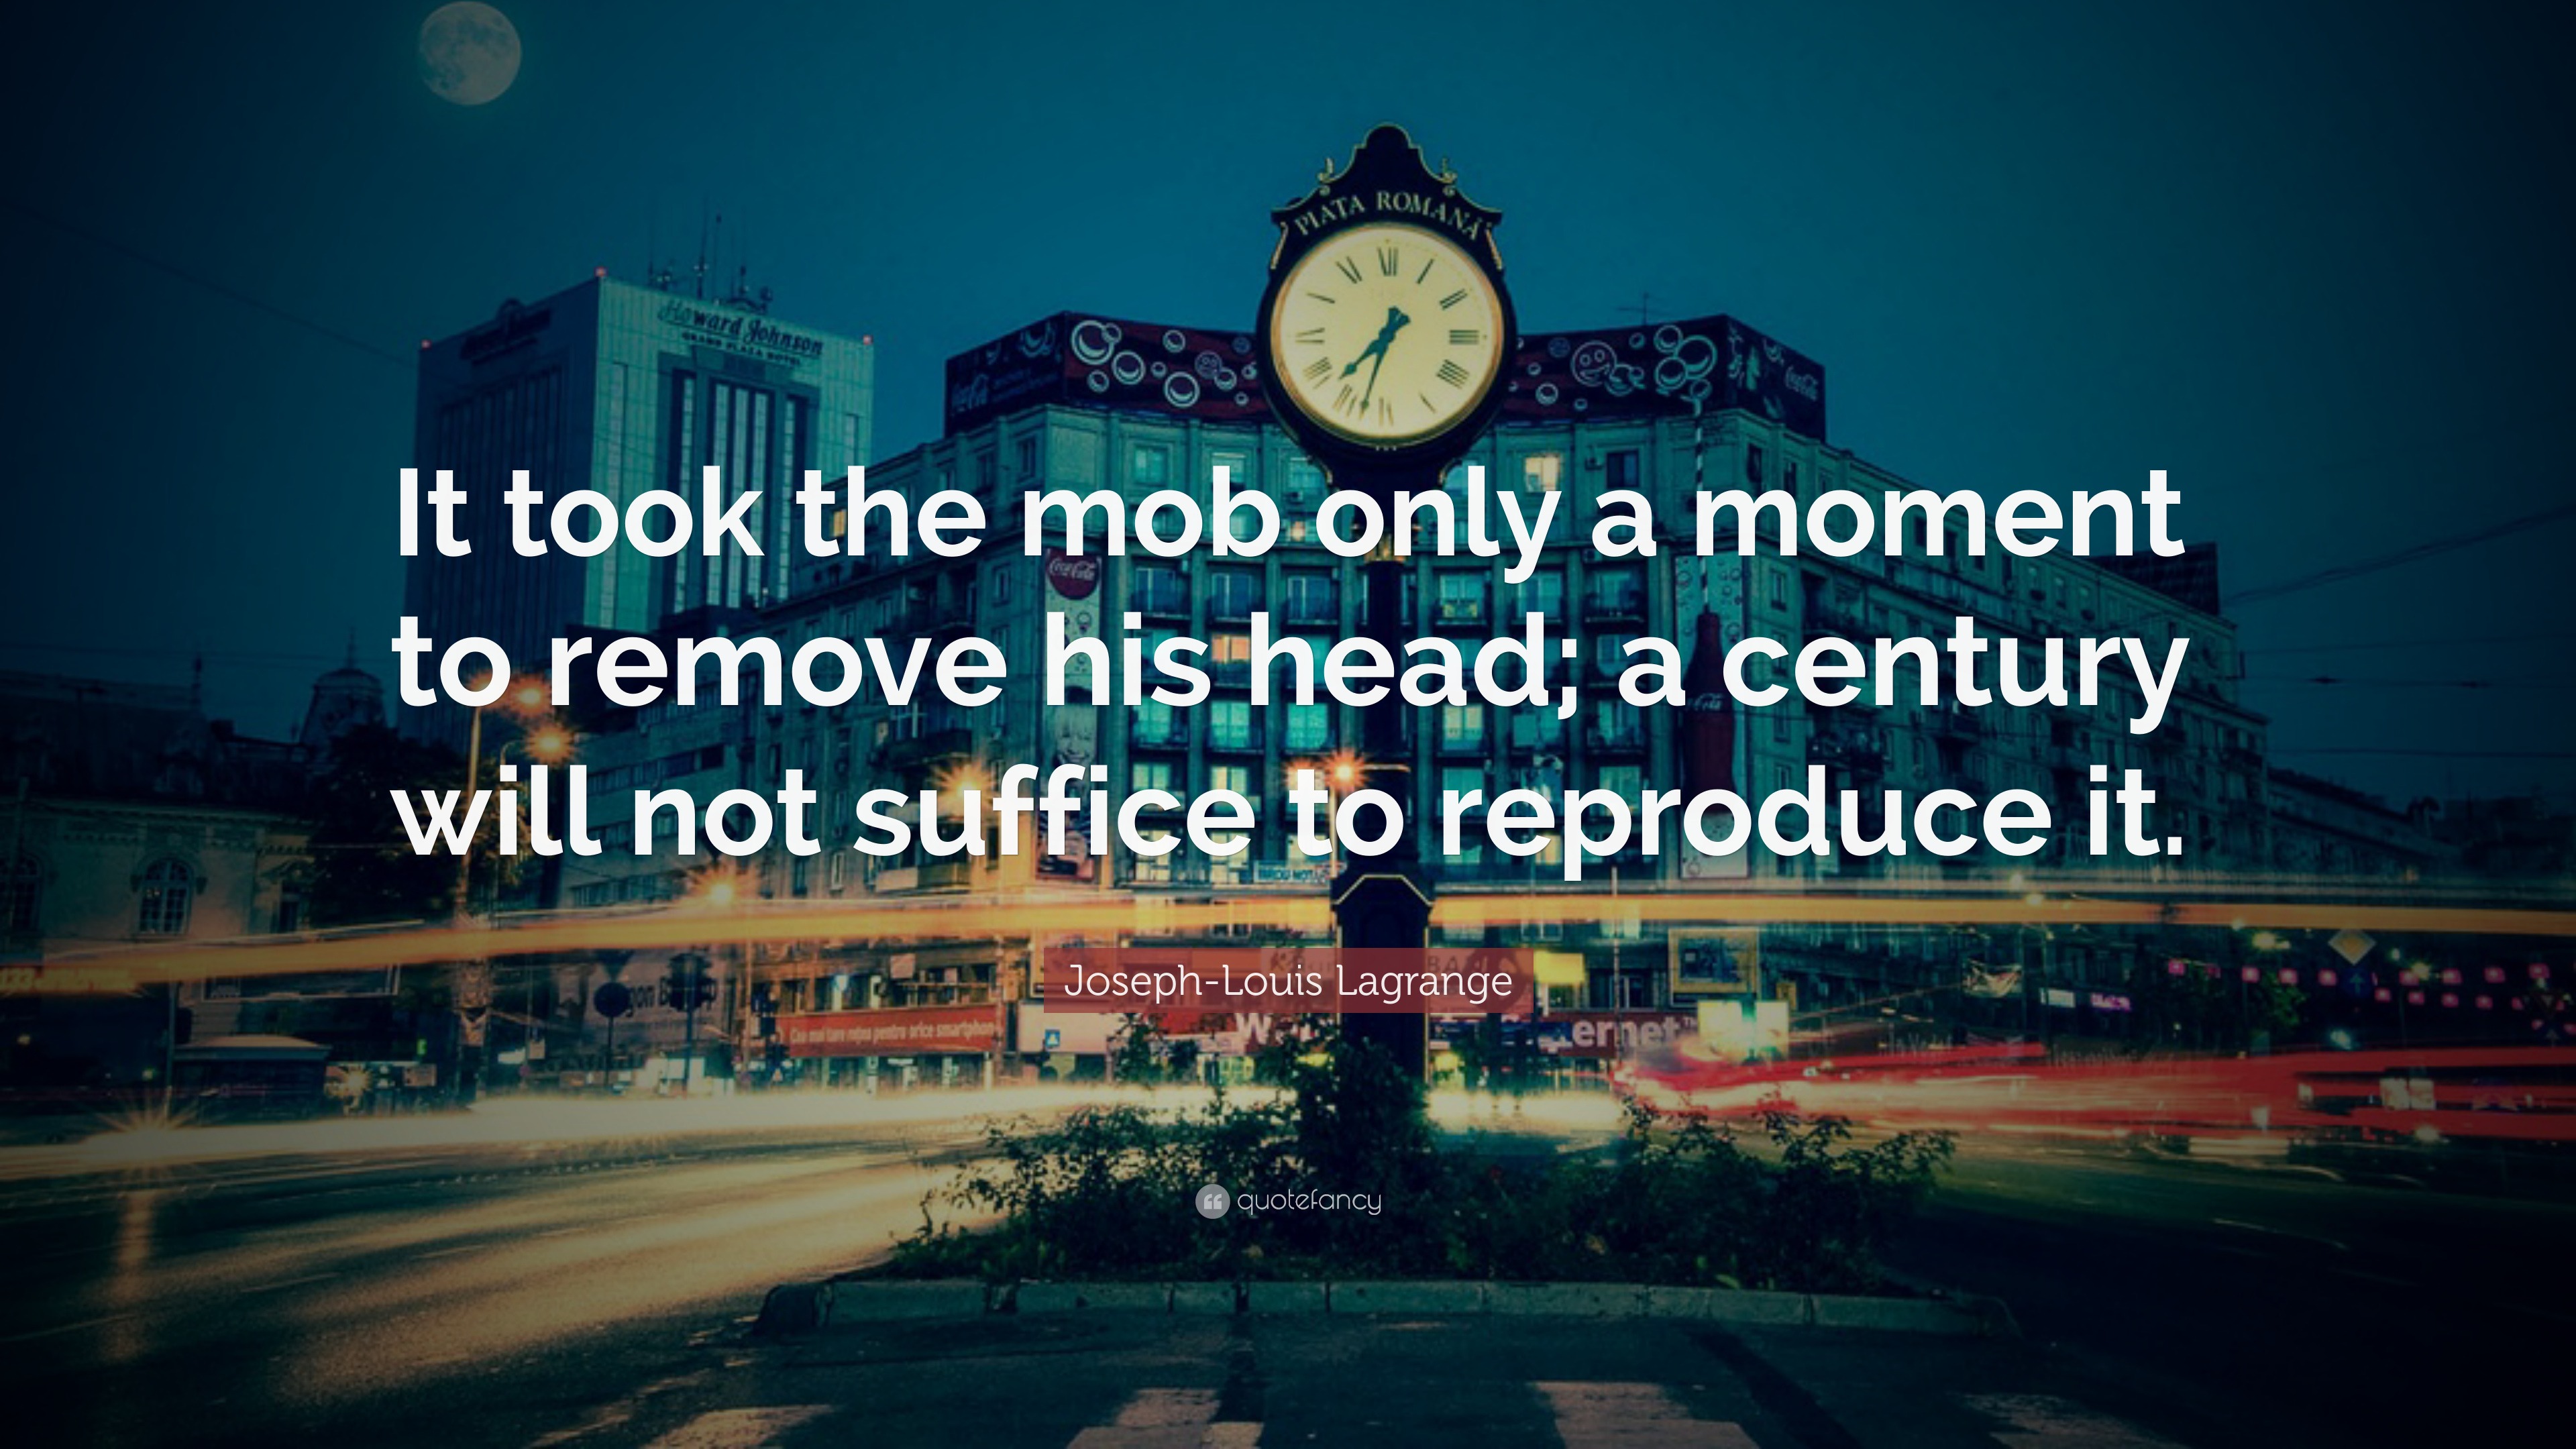 Joseph-Louis Lagrange Quote: “It took the mob only a moment to remove his head; a century will ...